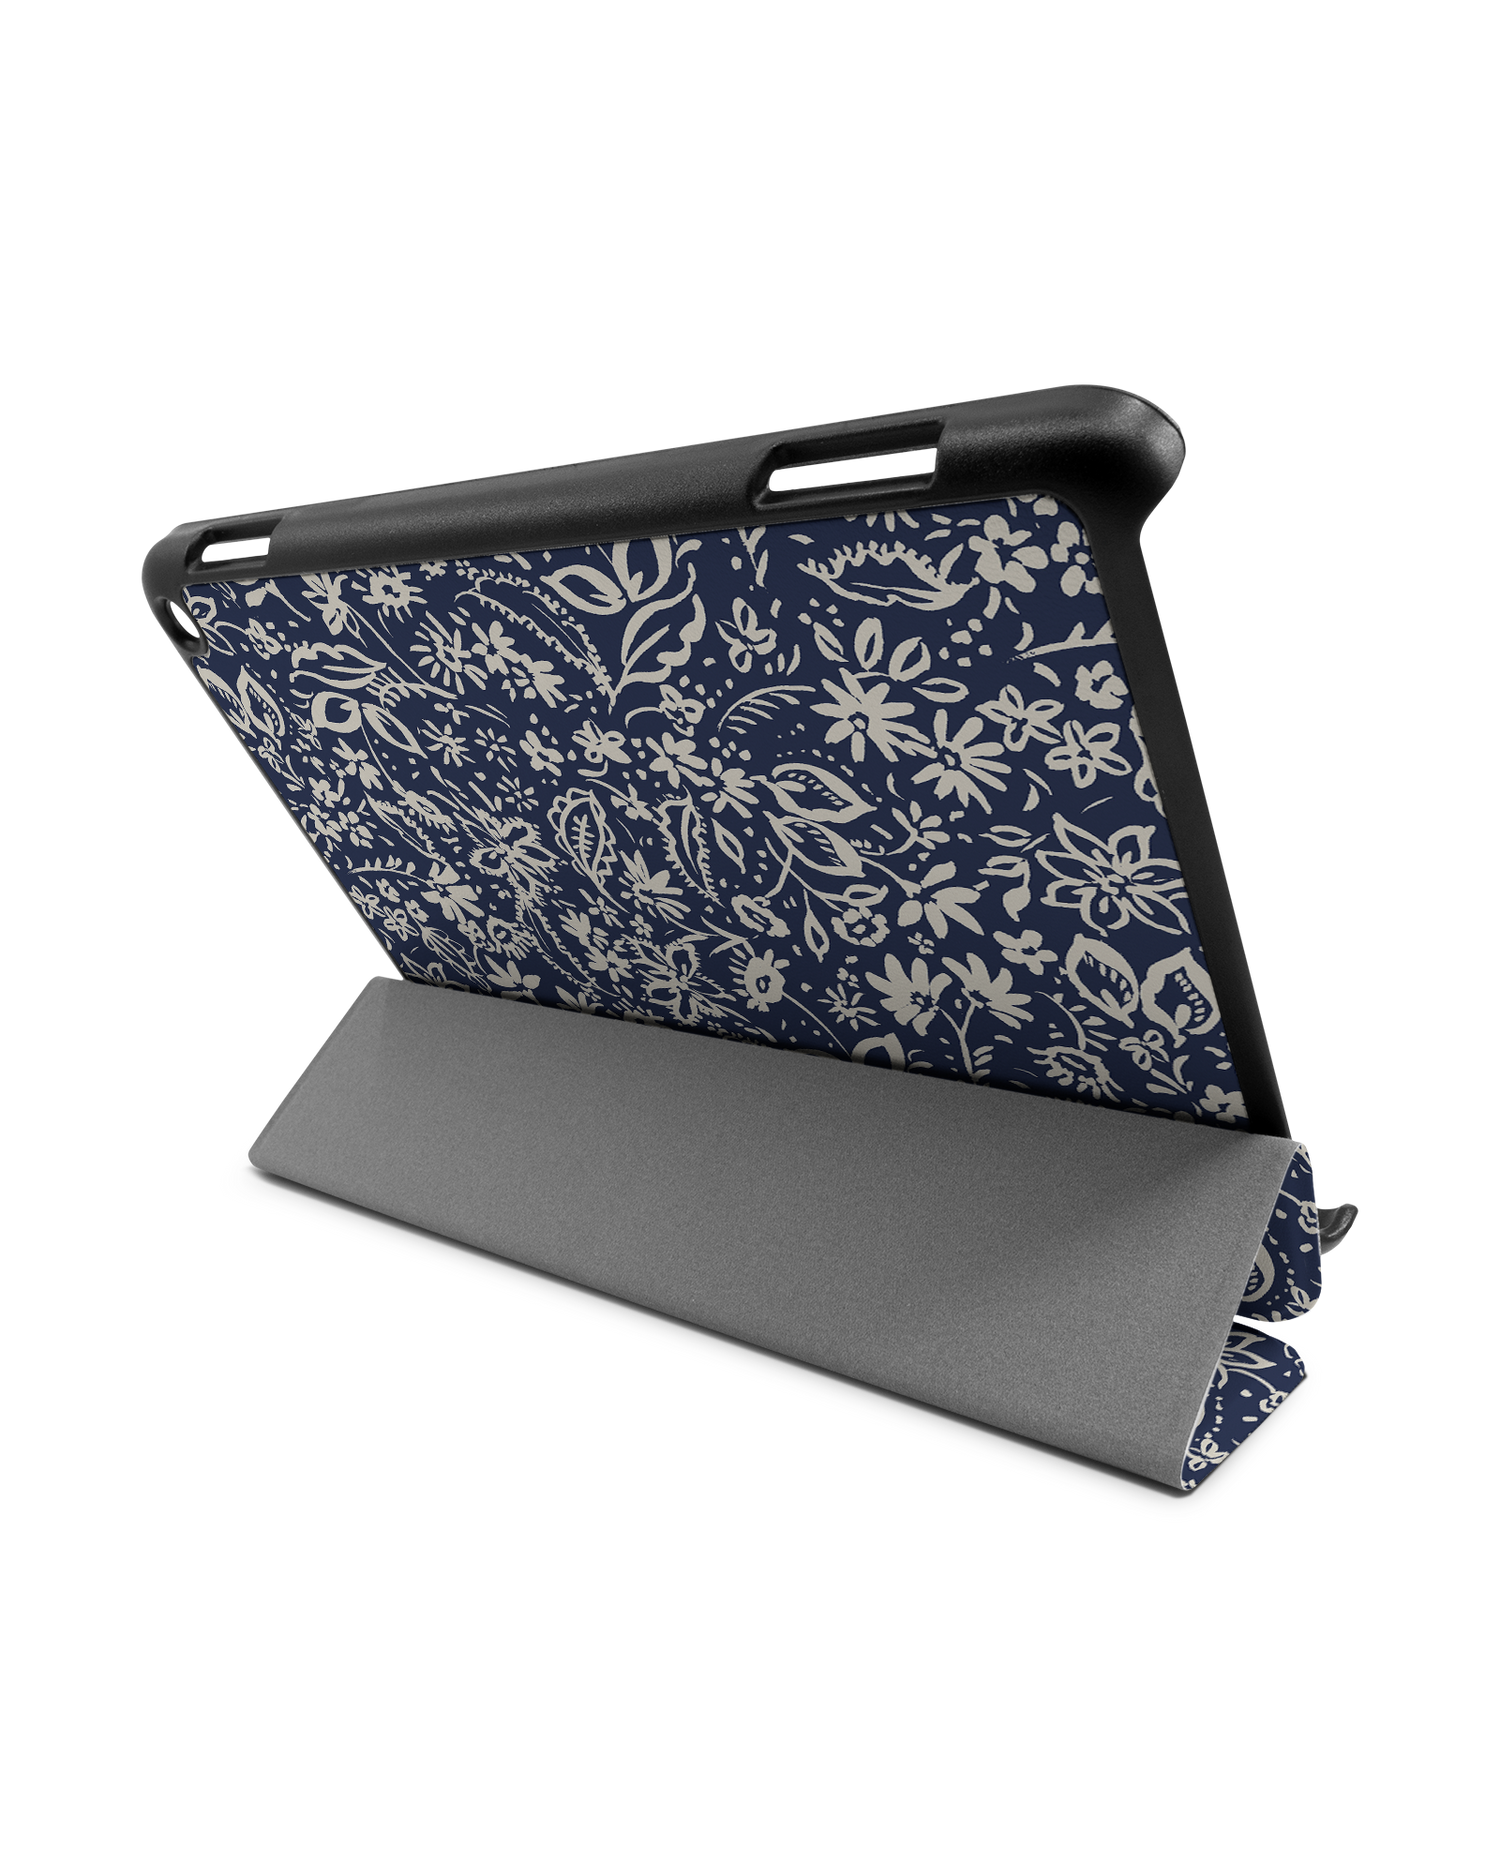 Ditsy Blue Paisley Tablet Smart Case for Amazon Fire HD 8 (2022), Amazon Fire HD 8 Plus (2022), Amazon Fire HD 8 (2020), Amazon Fire HD 8 Plus (2020): Used as Stand